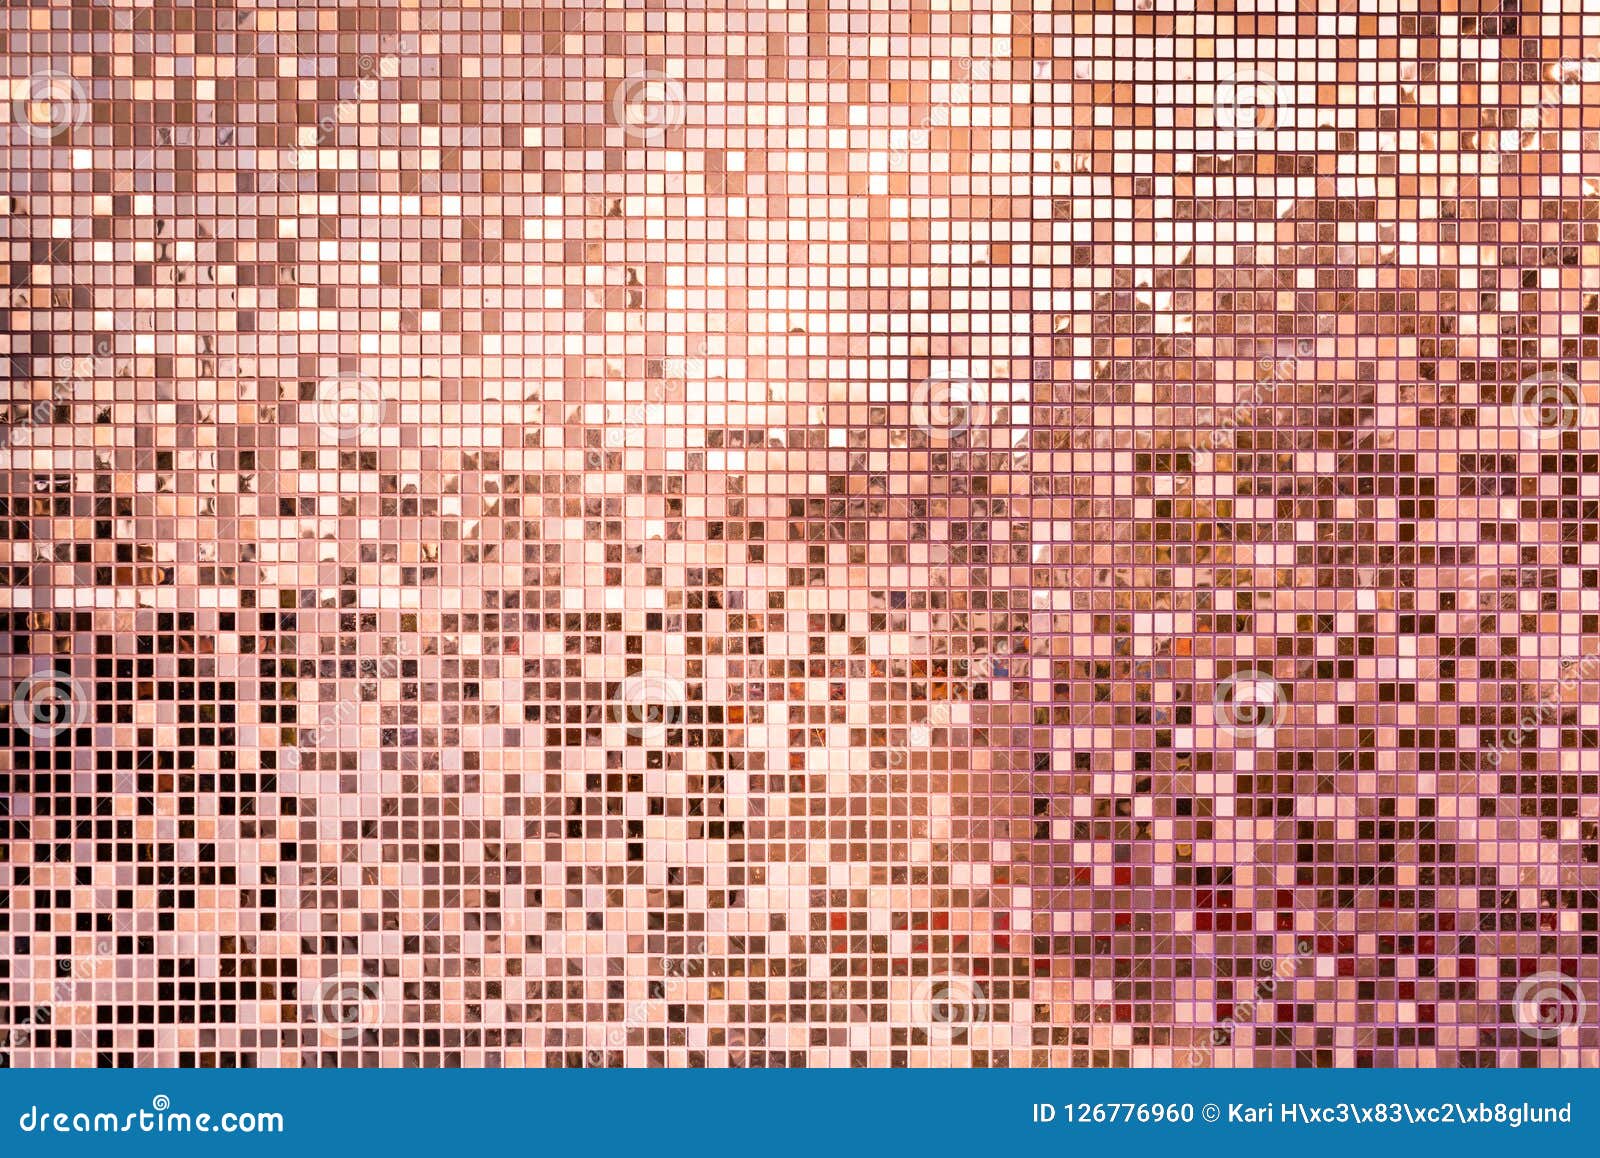 pink rose gold square mosaic tiles for background